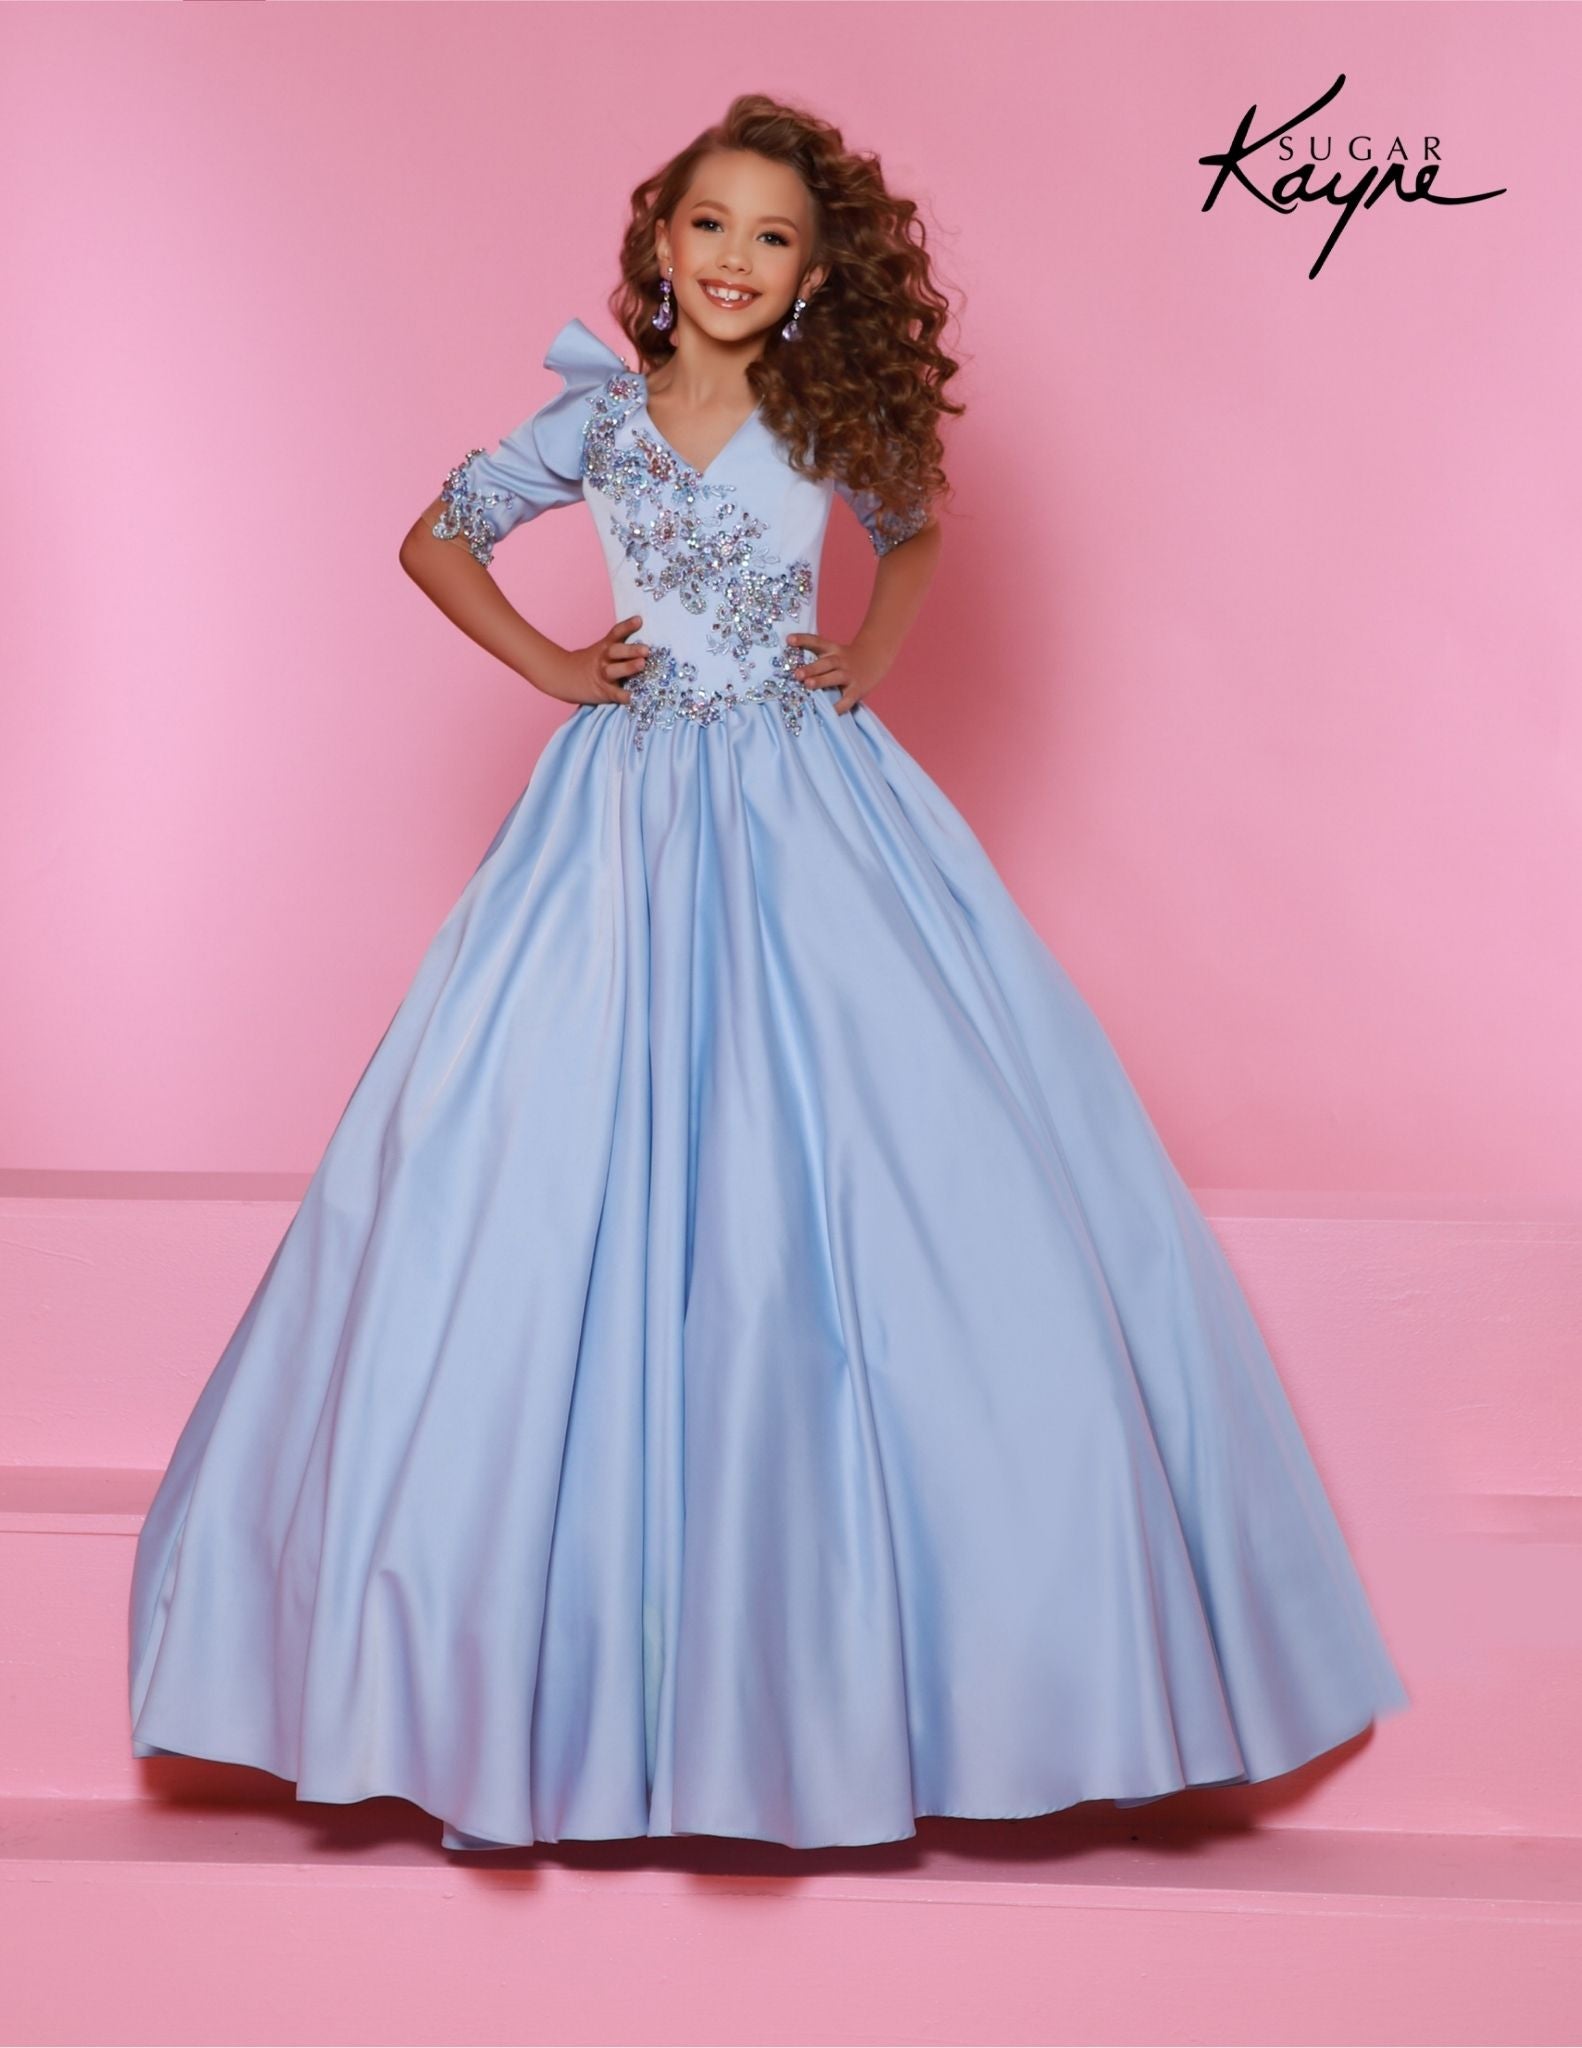 This beautiful Sugar Kayne C343 Pageant Dress offers a stunning A-line silhouette with a unique plunging V neckline adorned with dazzling crystals. Crafted from luxurious satin fabric, this dress is perfect for the little girl who wants to shine. Embrace the glamour of a storybook princess. Our Stretch Crepe Back Satin ballgown is sure to radiate grace of a true princess!